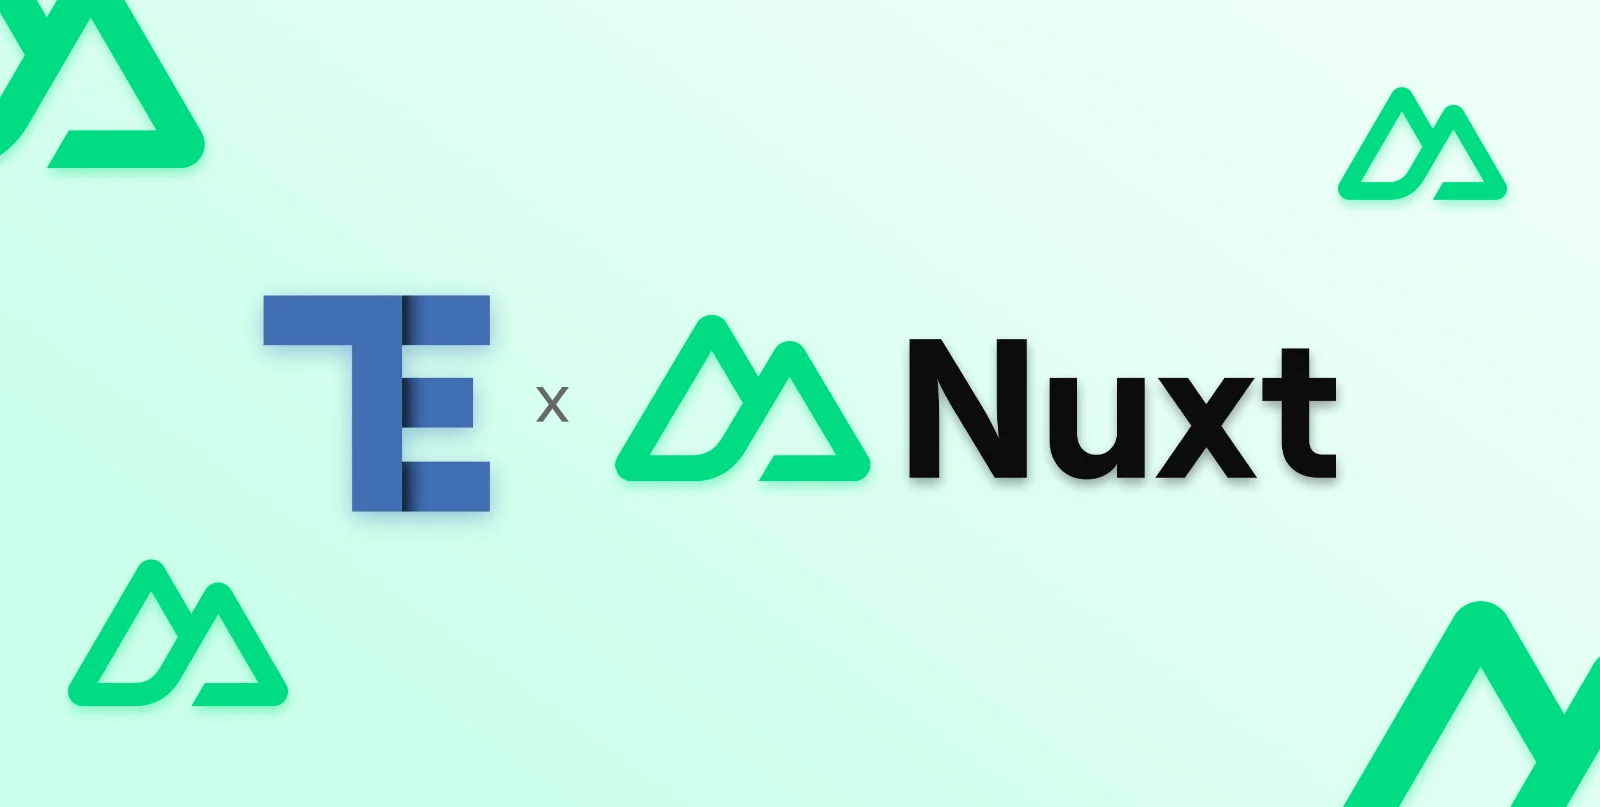 Nuxt integration for Tailwind CSS